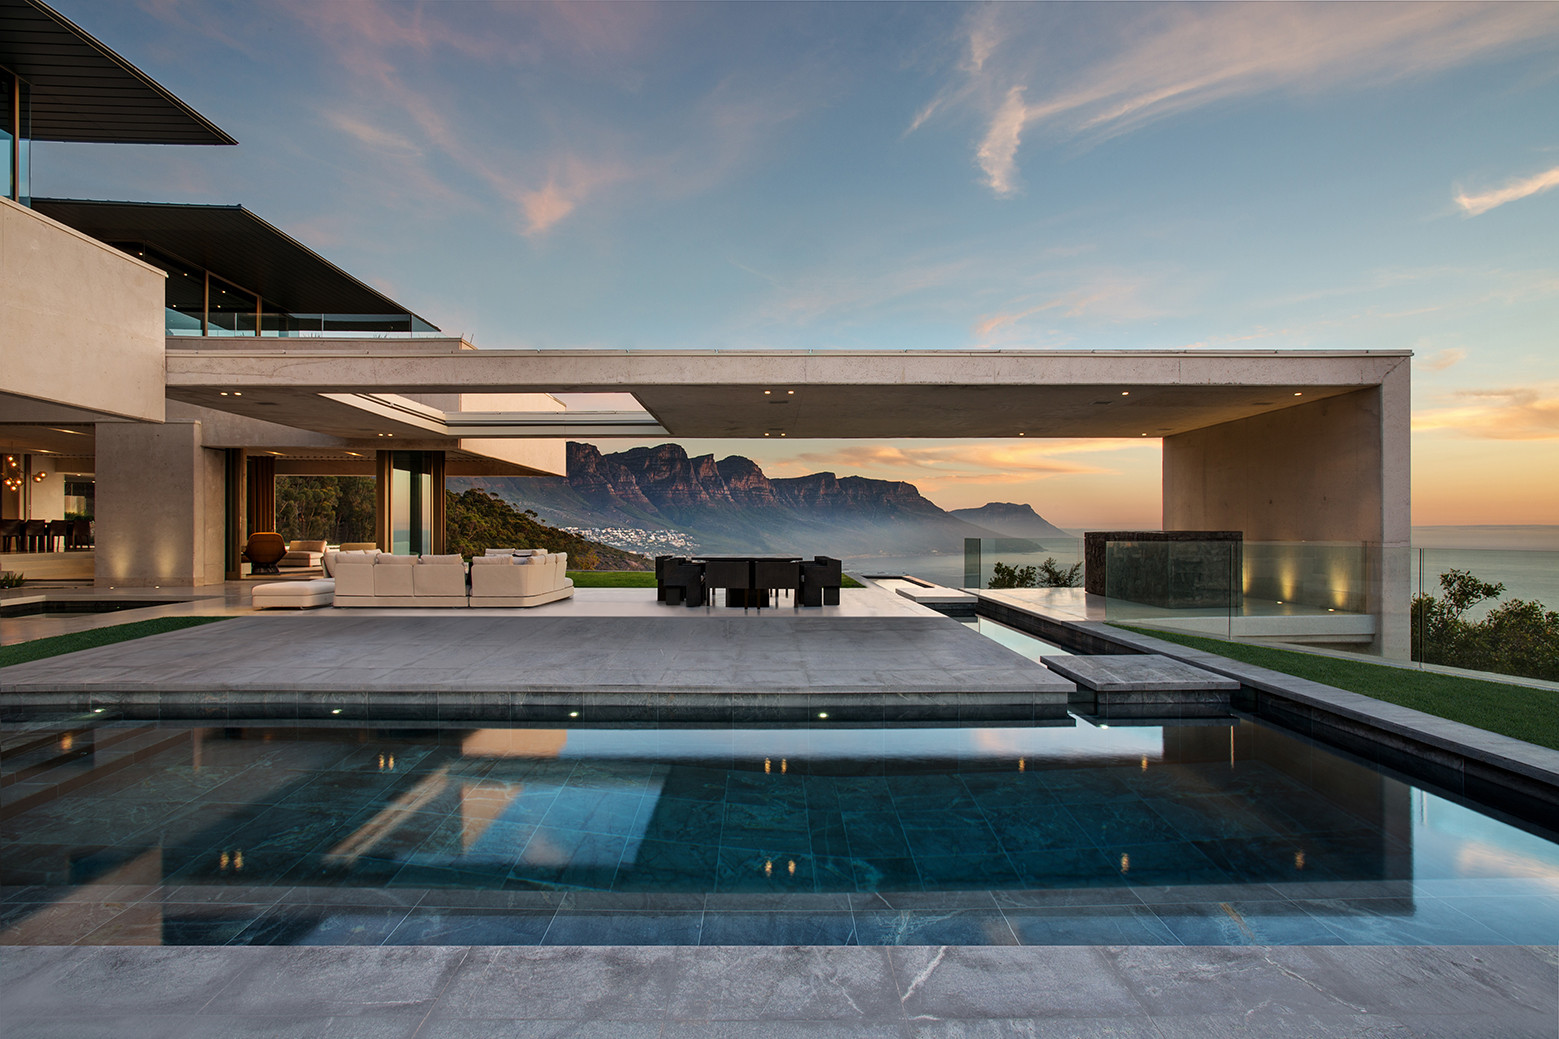 House Modern Architecture Swimming Pool Mountains Cape Town South Africa Twelve Apostles Table Mount 1559x1039